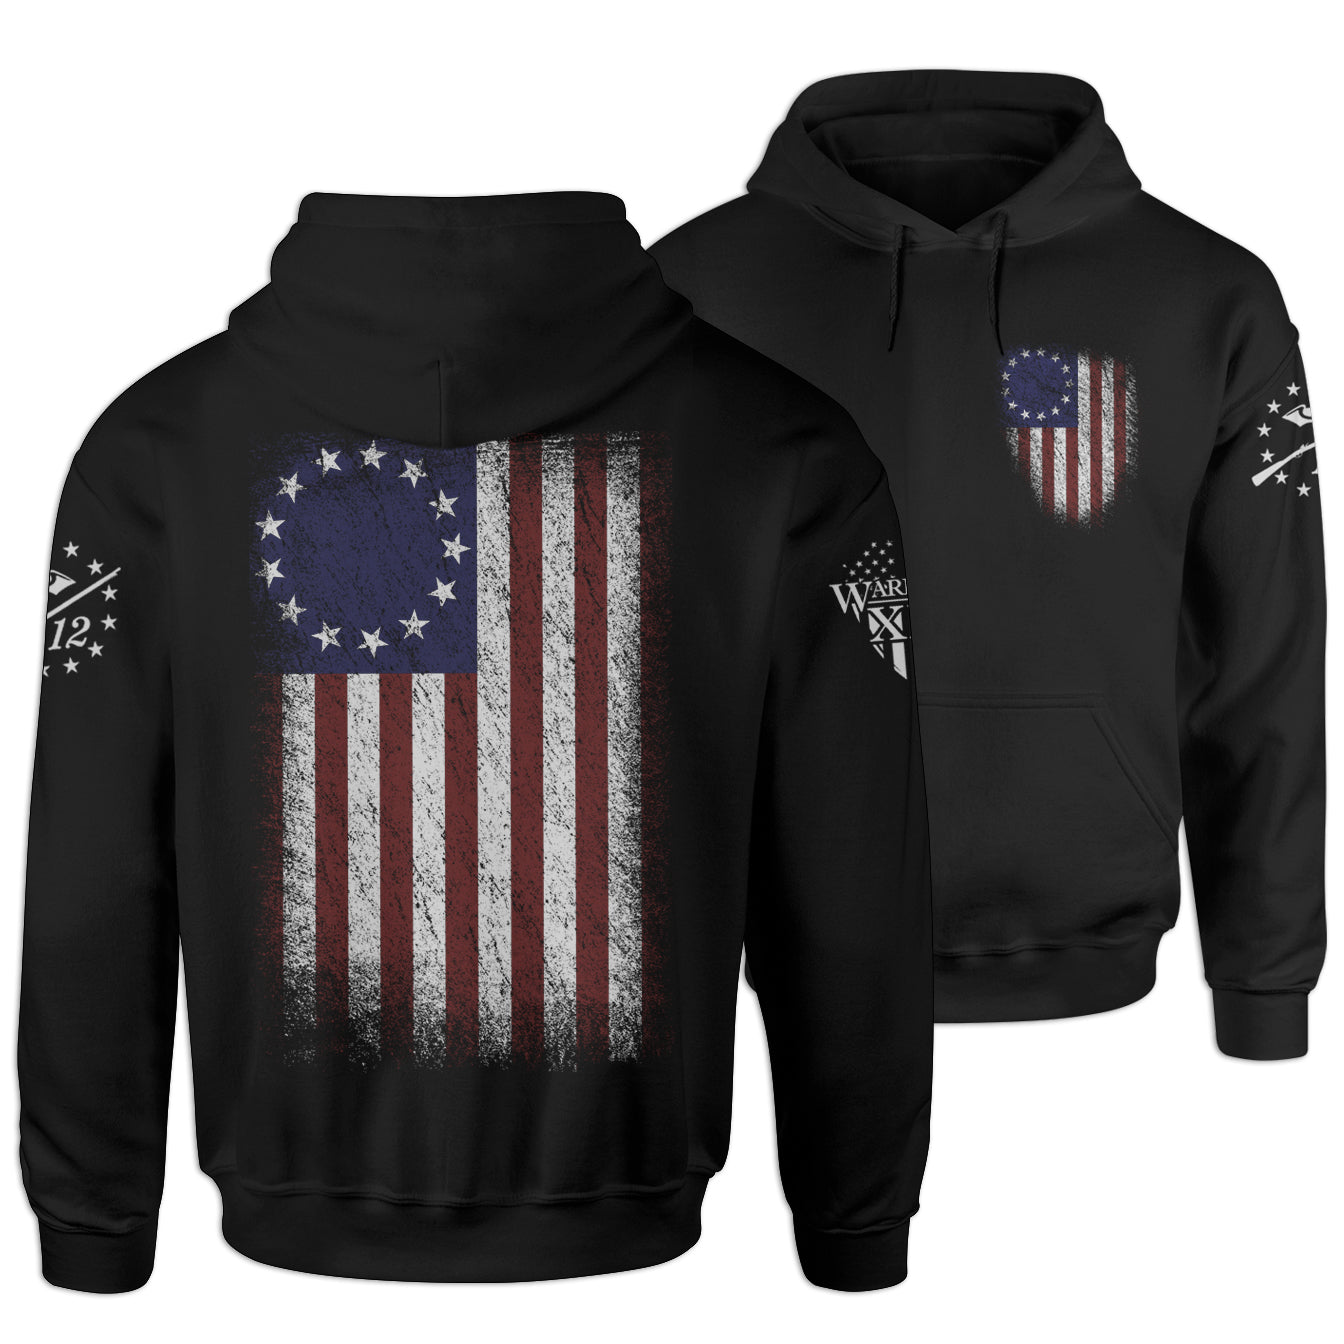 Black hoodie with the Betsy Ross flag emblem printed on the front.